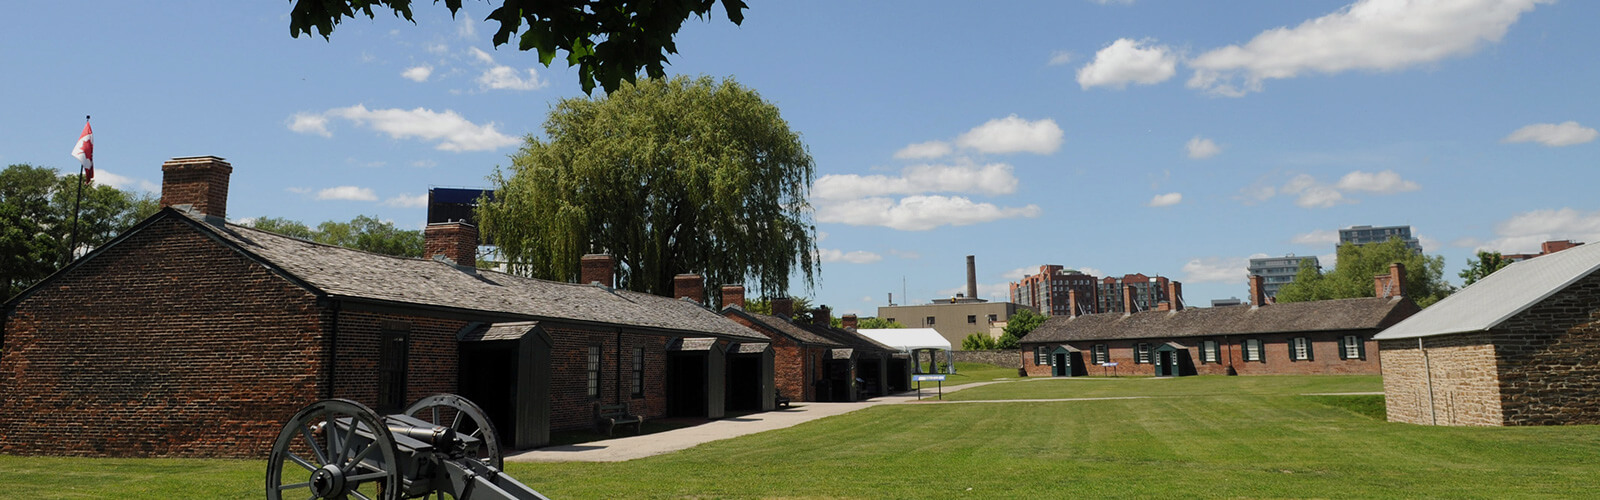 Taken from underneath a lush maple tree, of which the leaves are silhouetted against a clear blue sky. The view is of Fort York, and the historic buildings that are on the grounds.